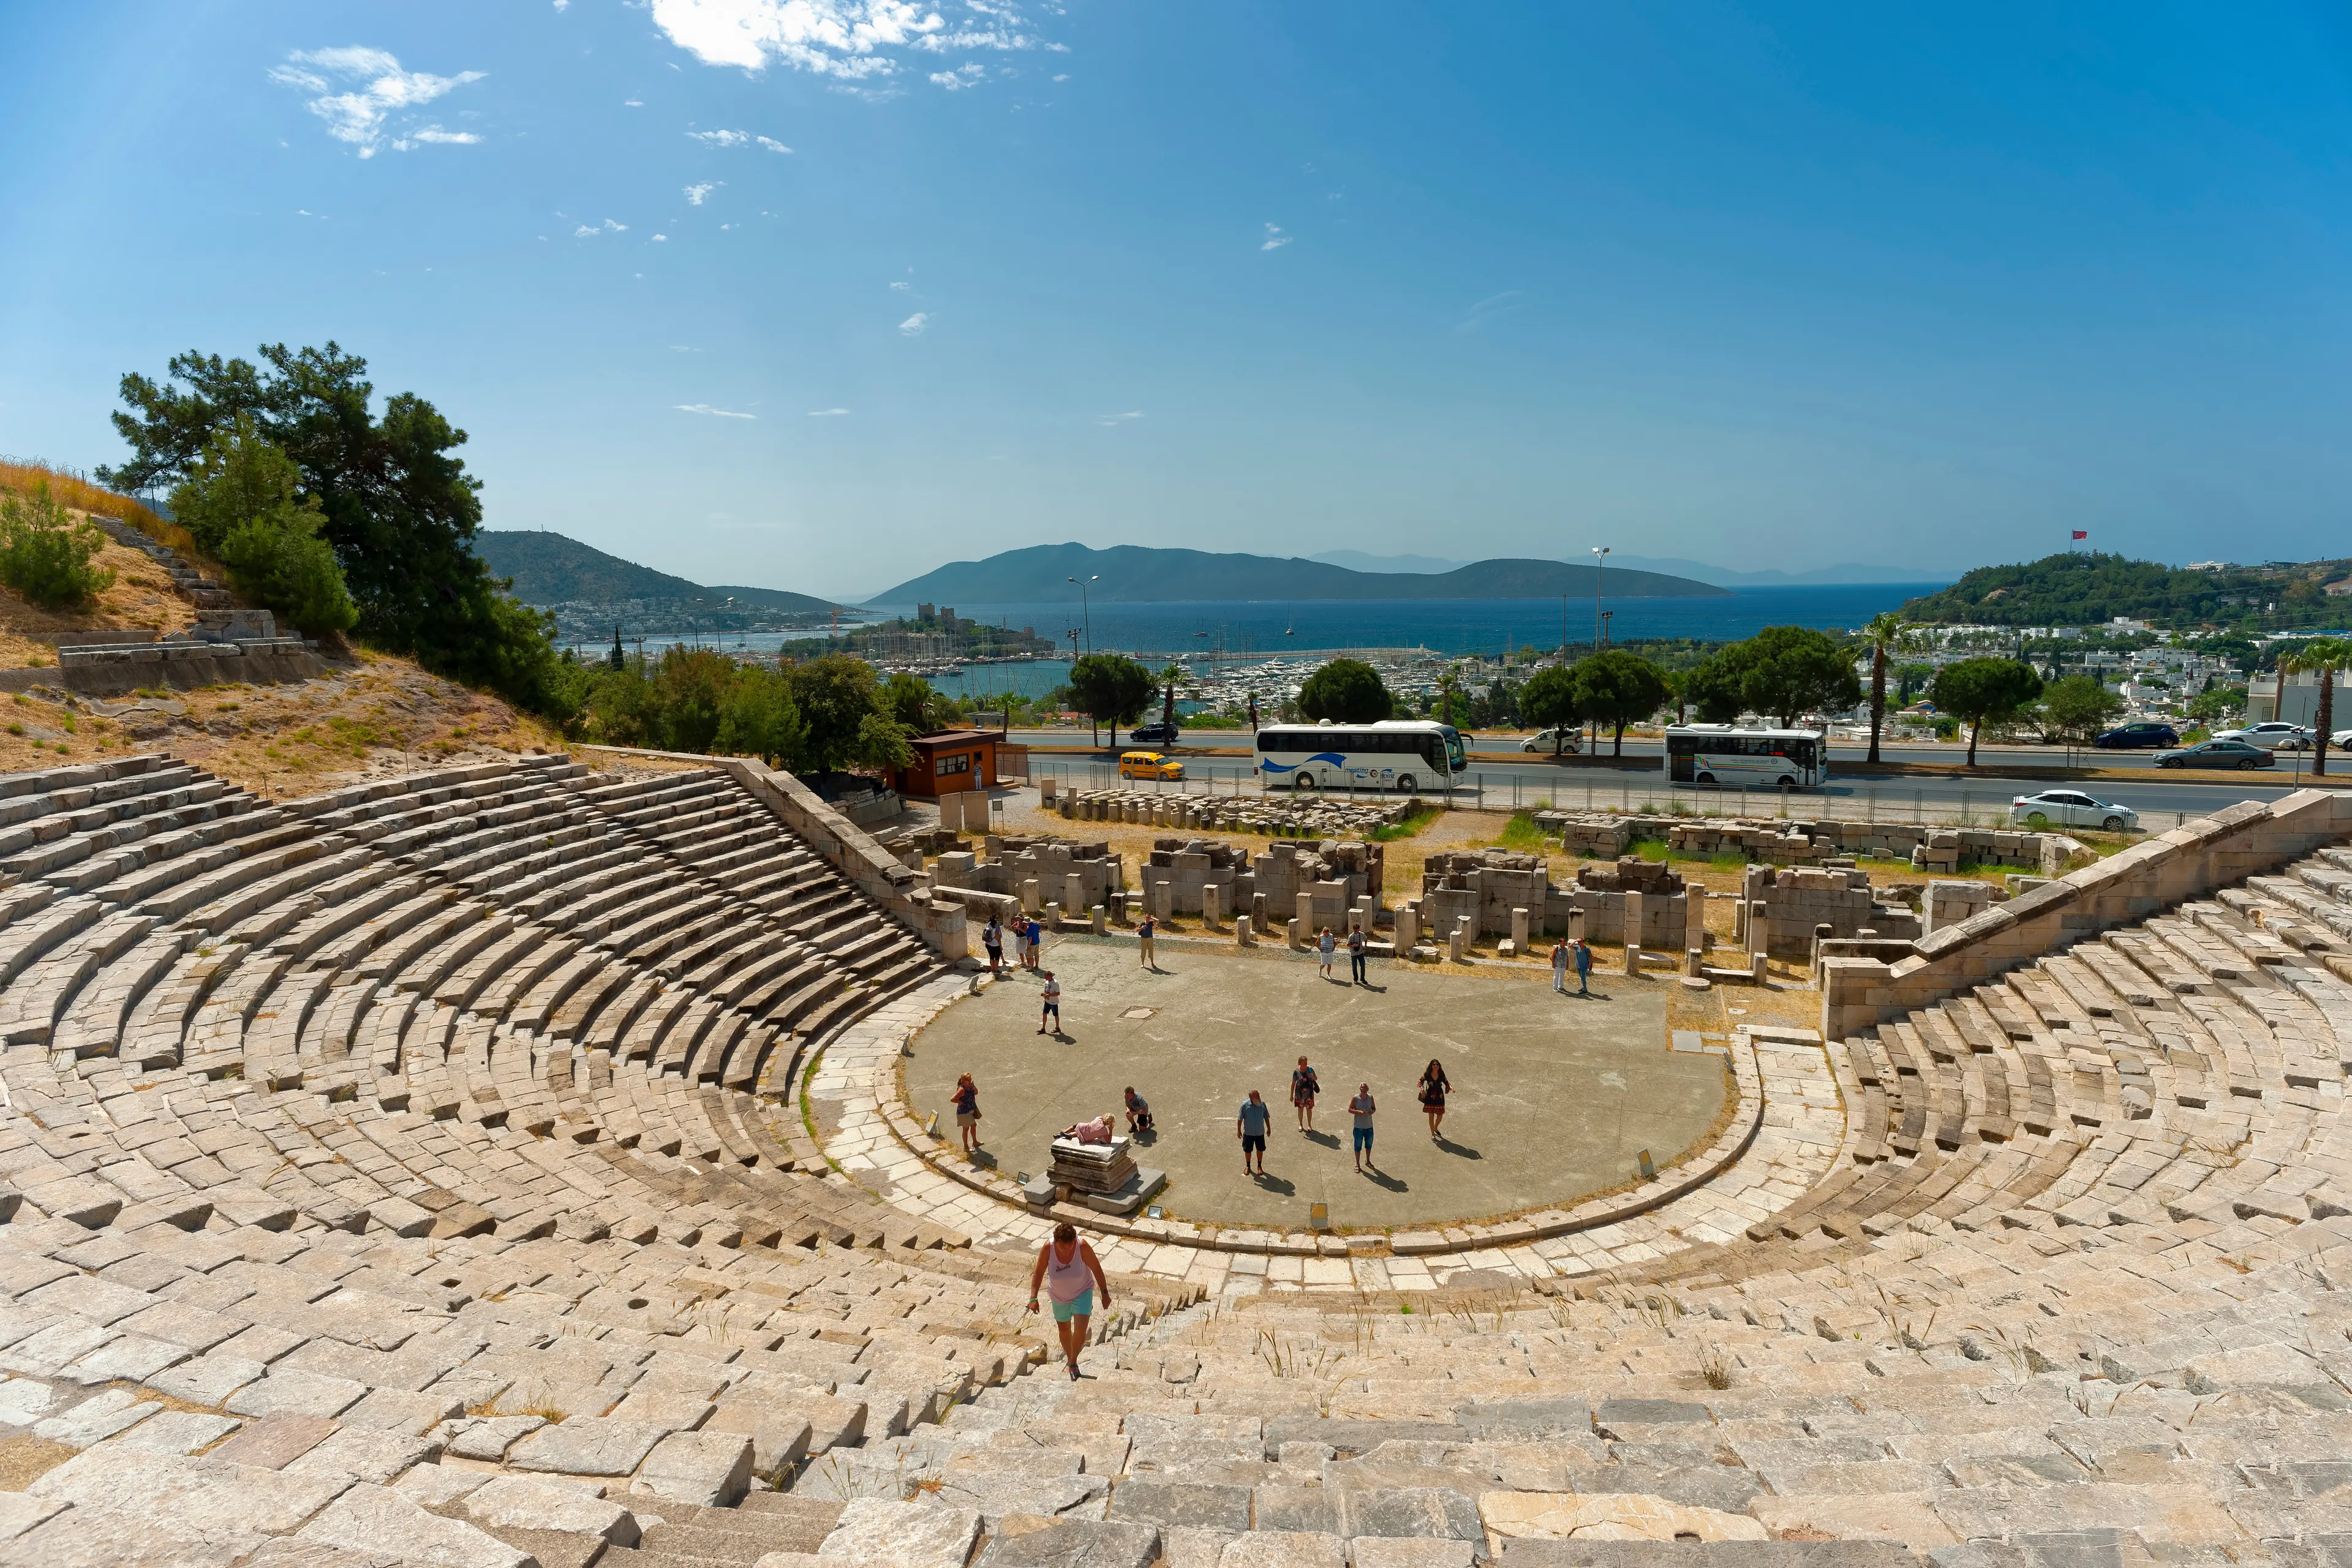 4-Day Family Adventure Itinerary in Bodrum, Turkey